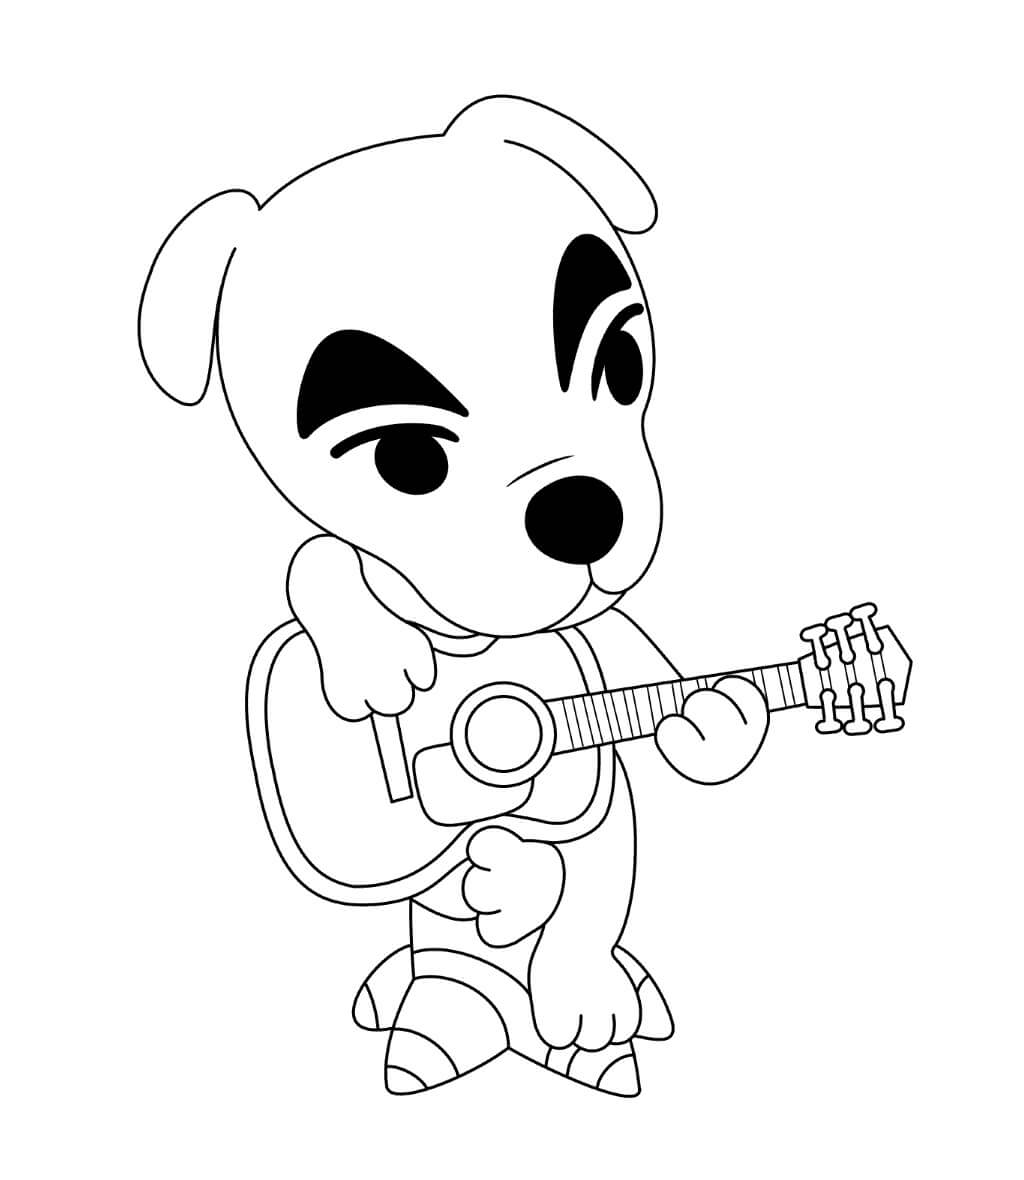 Jack russell playing guitar coloring page